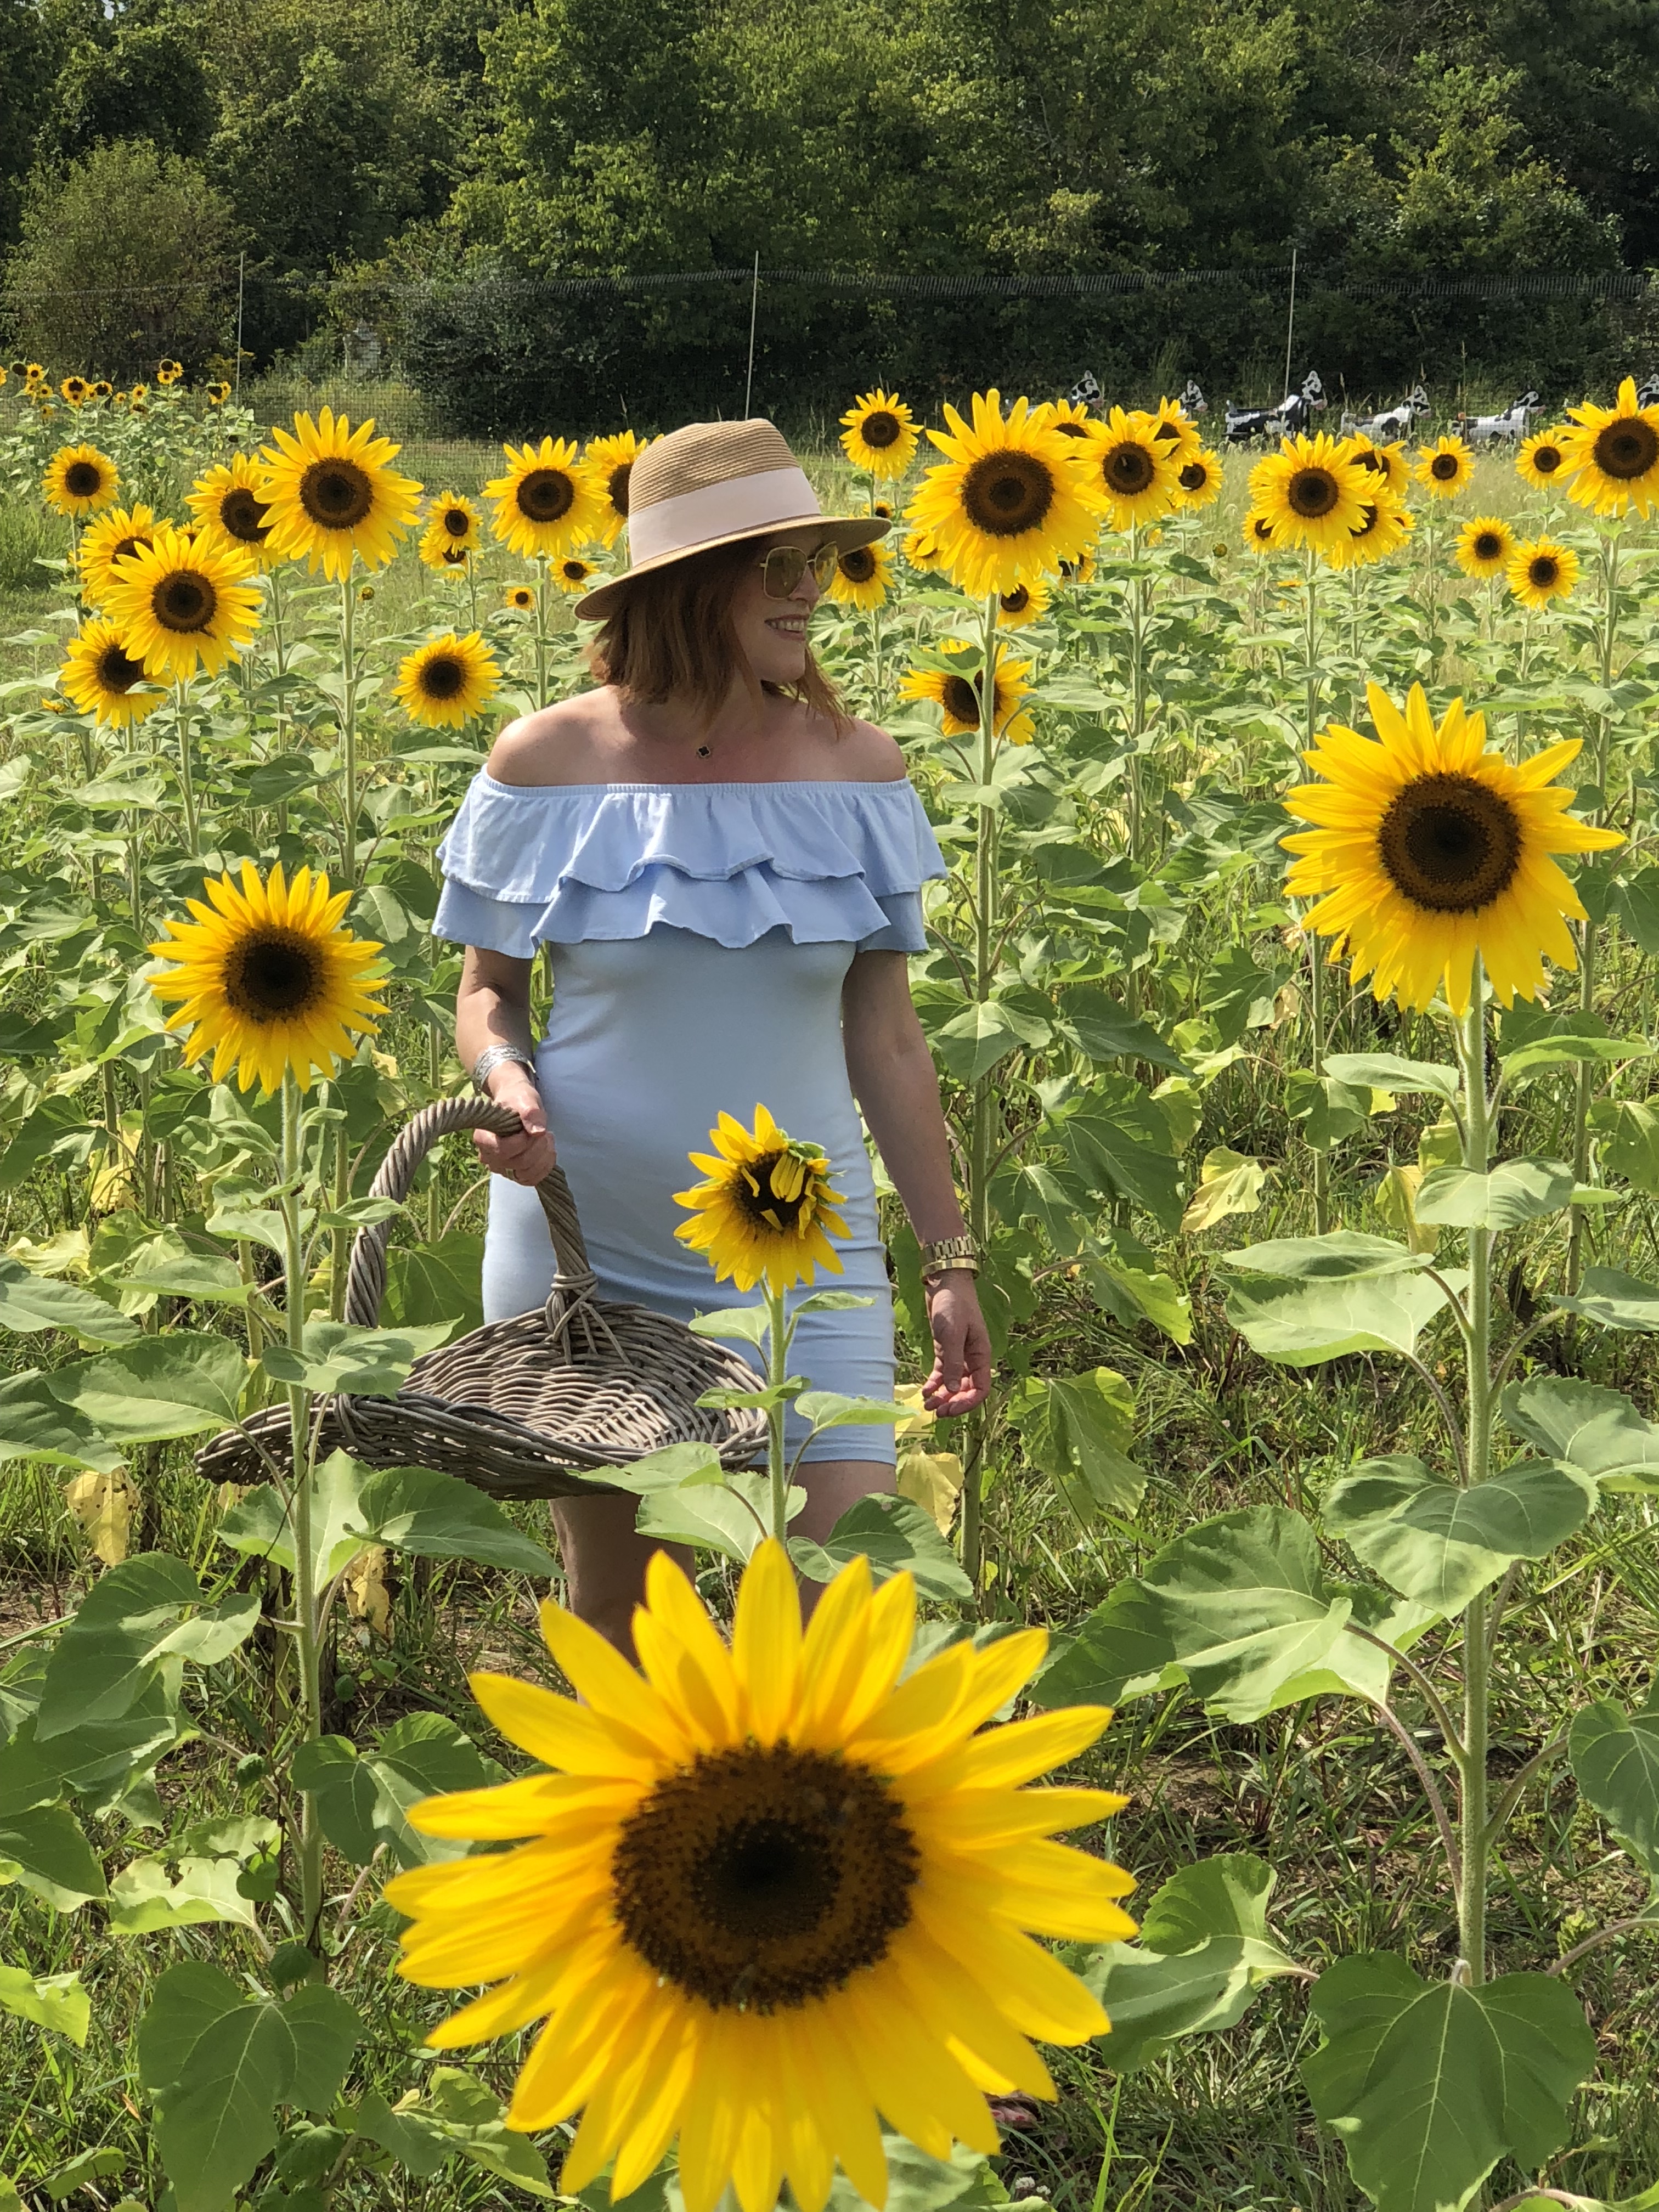 18/20/24/28/32 Inch Spandex Travel Luggage Cover S Summer Sun Over The Sunflower Field Fashion Creative Design Anti-Scratch Stretchy Travel Suitcase Protector Baggage Covers